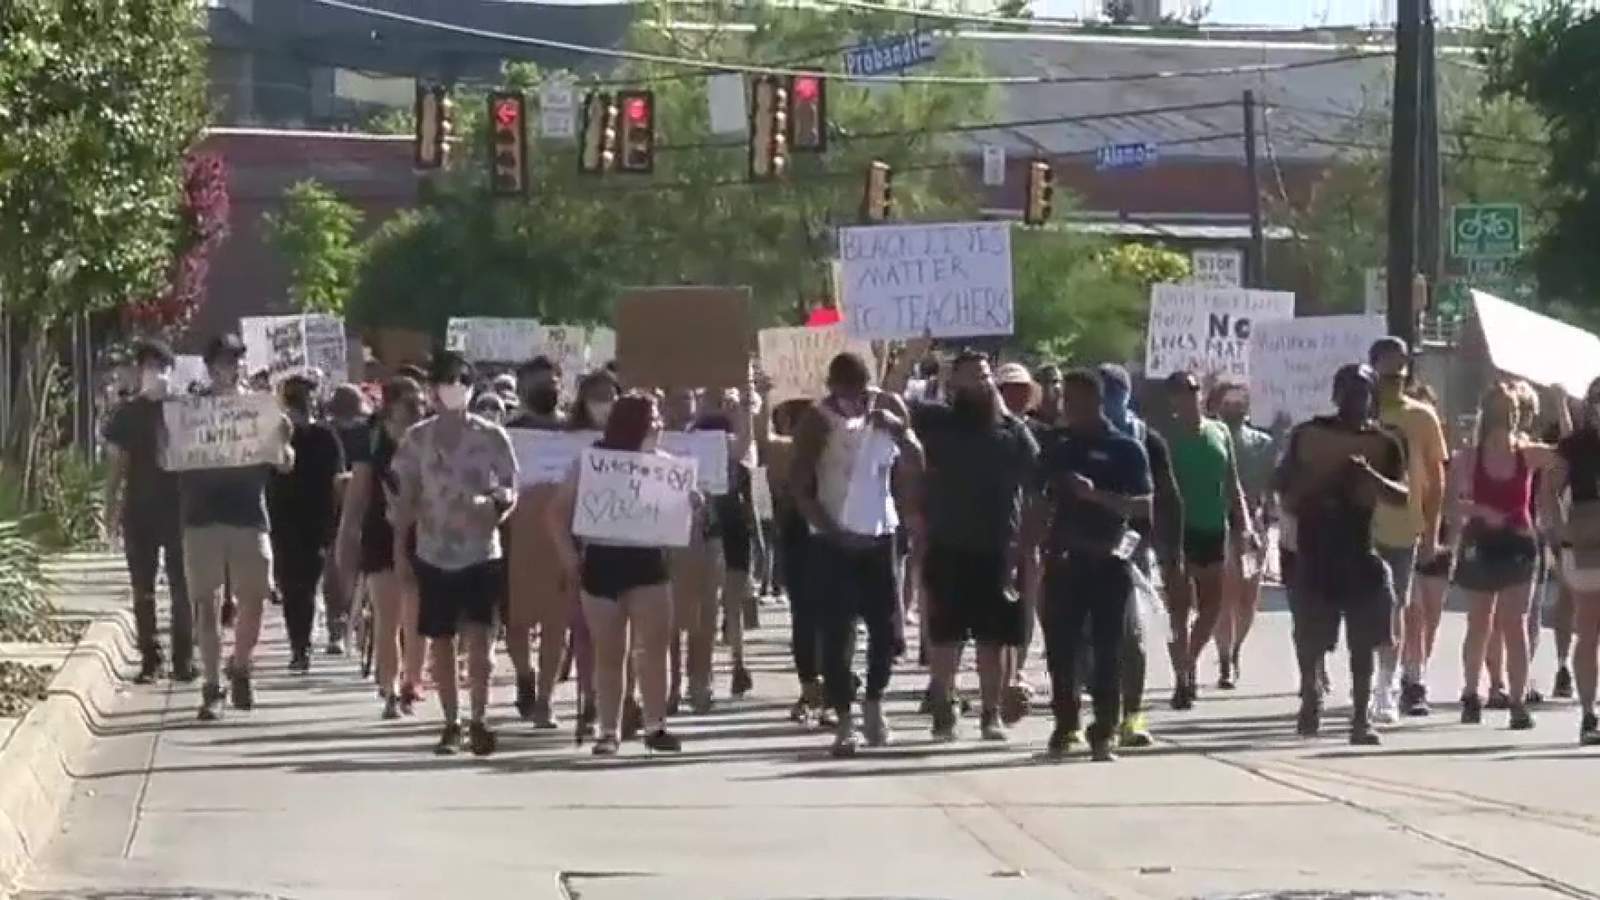 Community marches for 10th day to protest racism, bring awareness to racial disparities